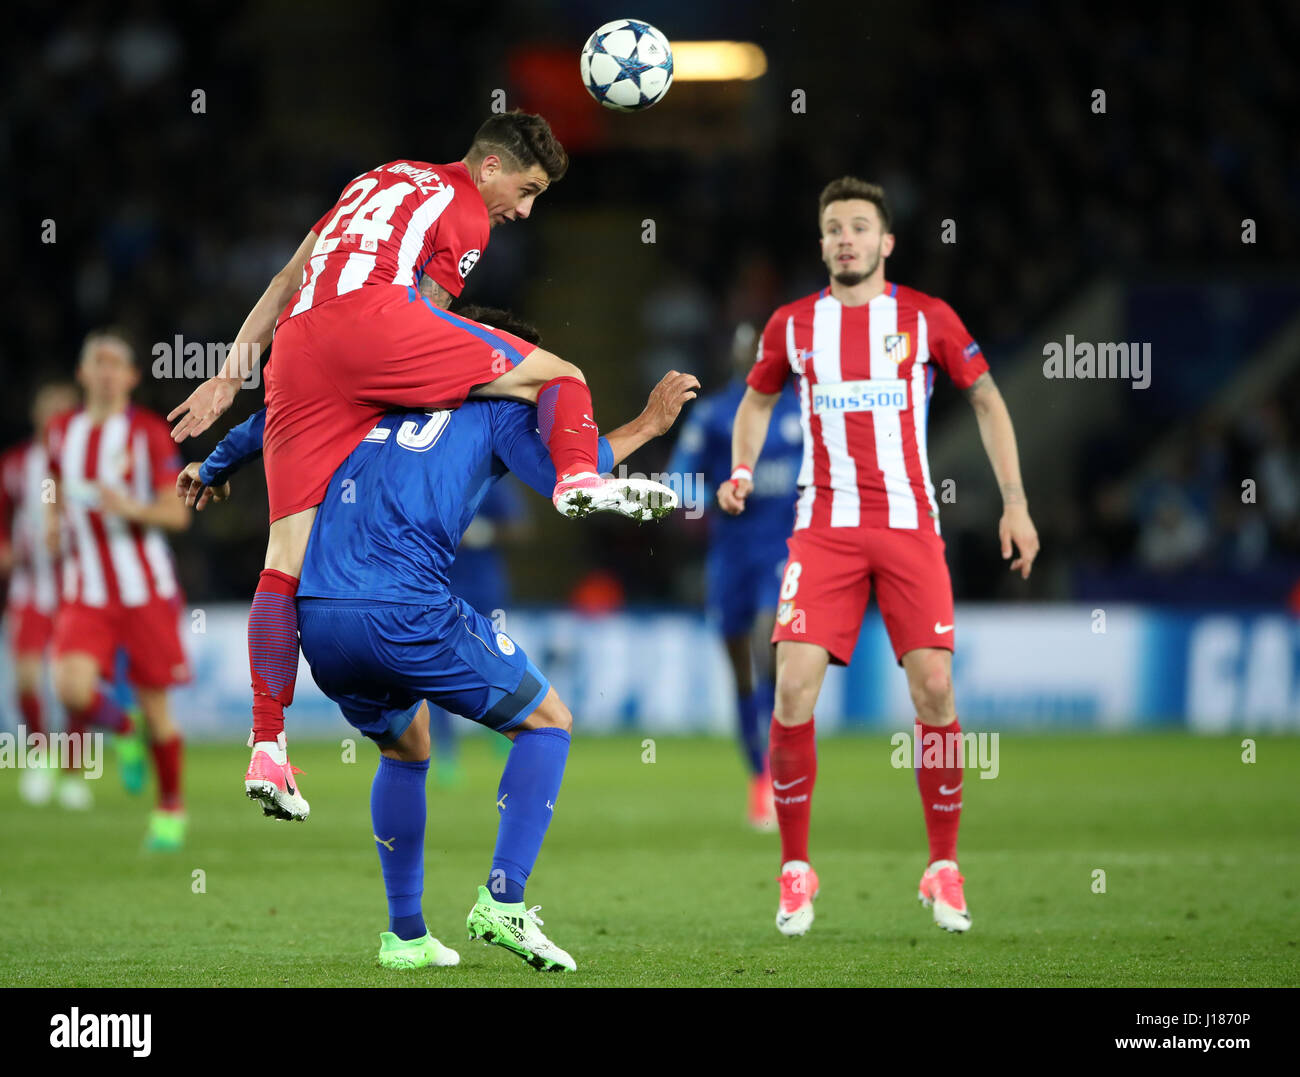 Atletico Madrid's Jose Maria Gimenez jumps over Leicester City's Leonardo Ulloa during the second leg of the UEFA Champions League quarter final match at the King Power Stadium, Leicester. Stock Photo